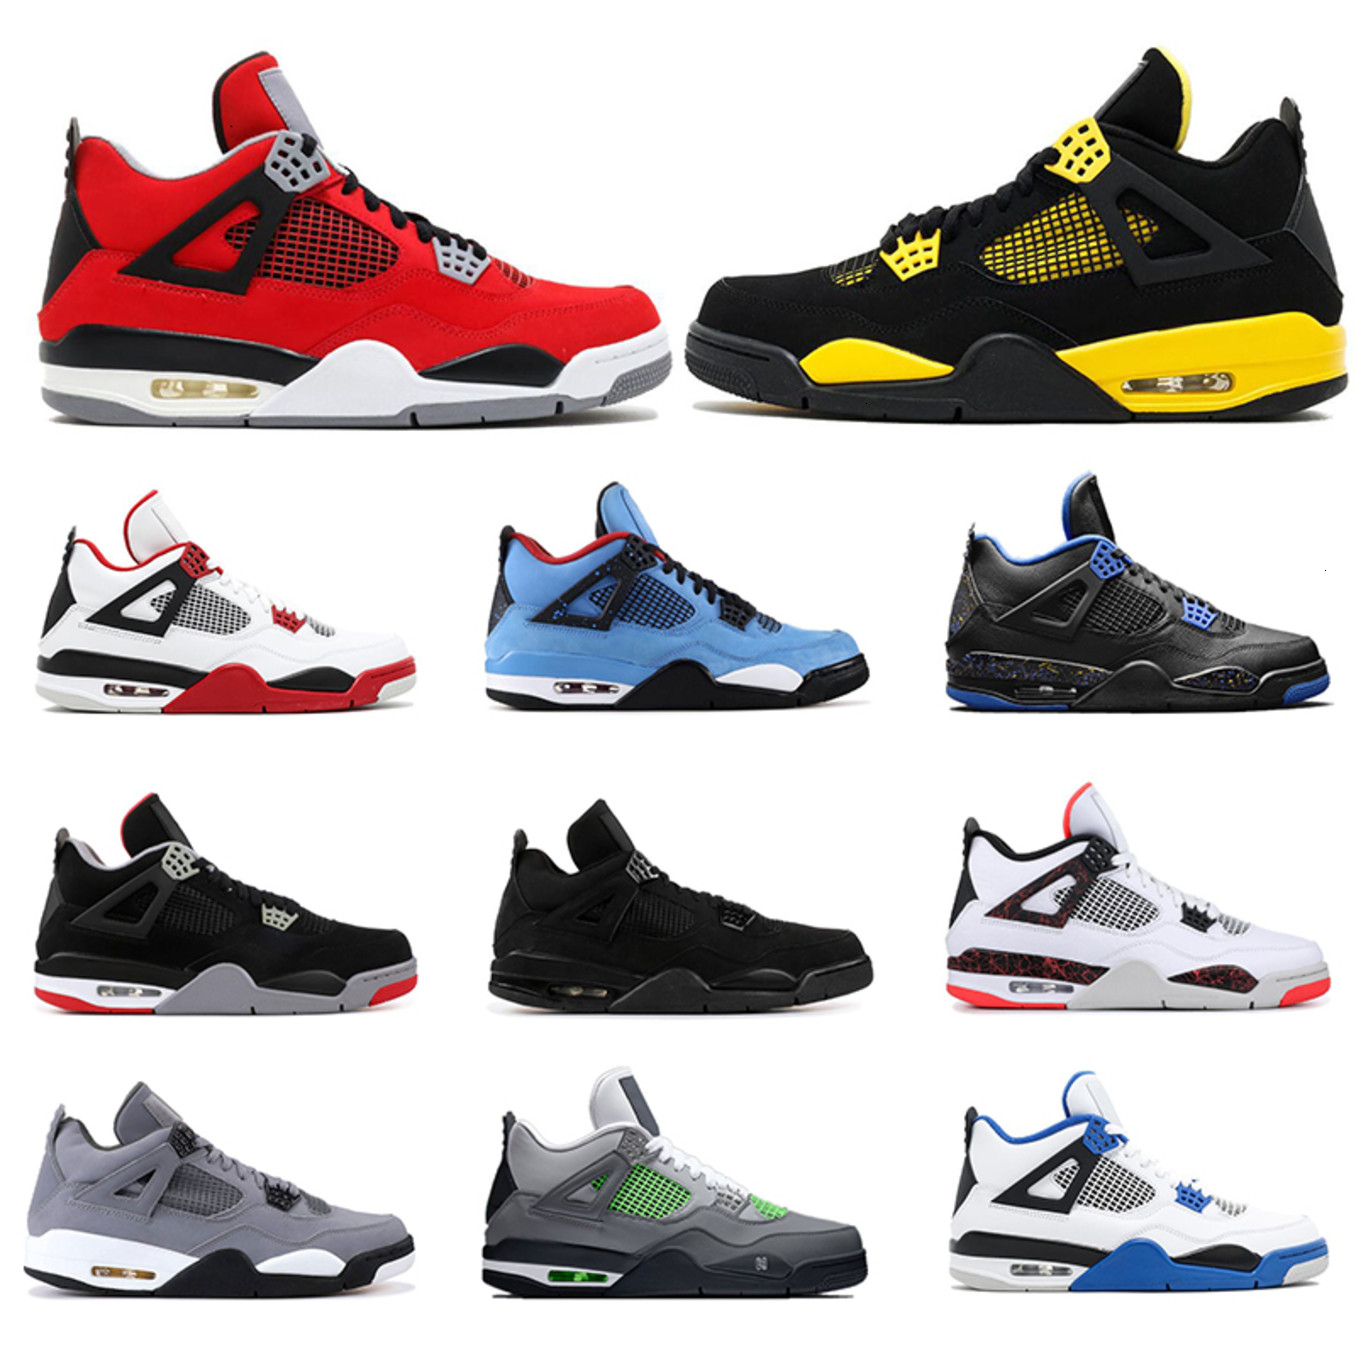 

New Basketball Shoes 4s For Mens Mushroom Cactus Jack Tattoo Bred Fire Red Thunder Neon Alternate Cool Grey Mens Sports Sneakers Size 7-13